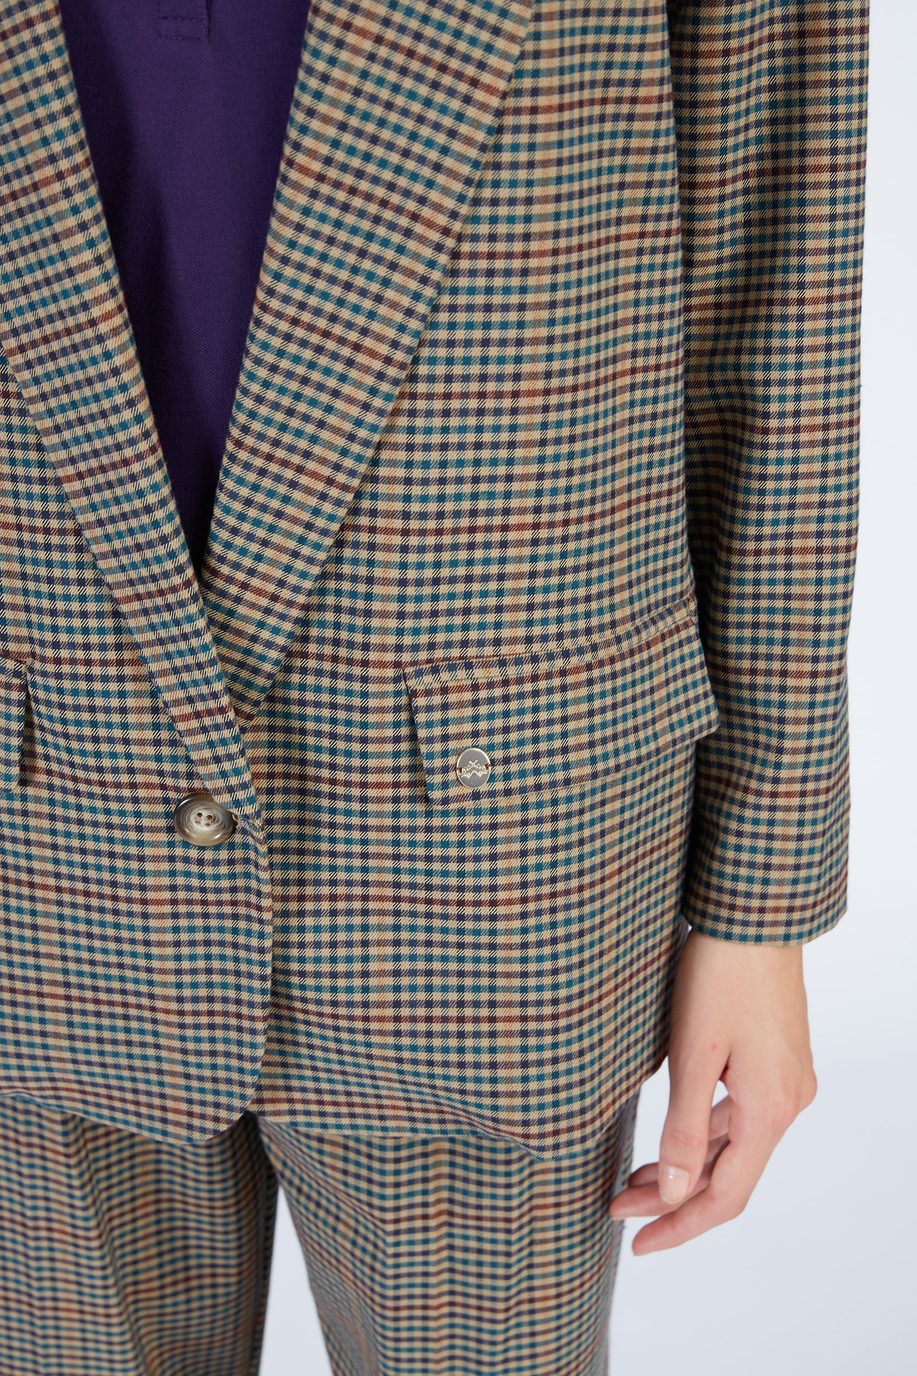 Women’s single-breasted twill jacquard blazer with pockets in regular fit - Winter looks for her | La Martina - Official Online Shop